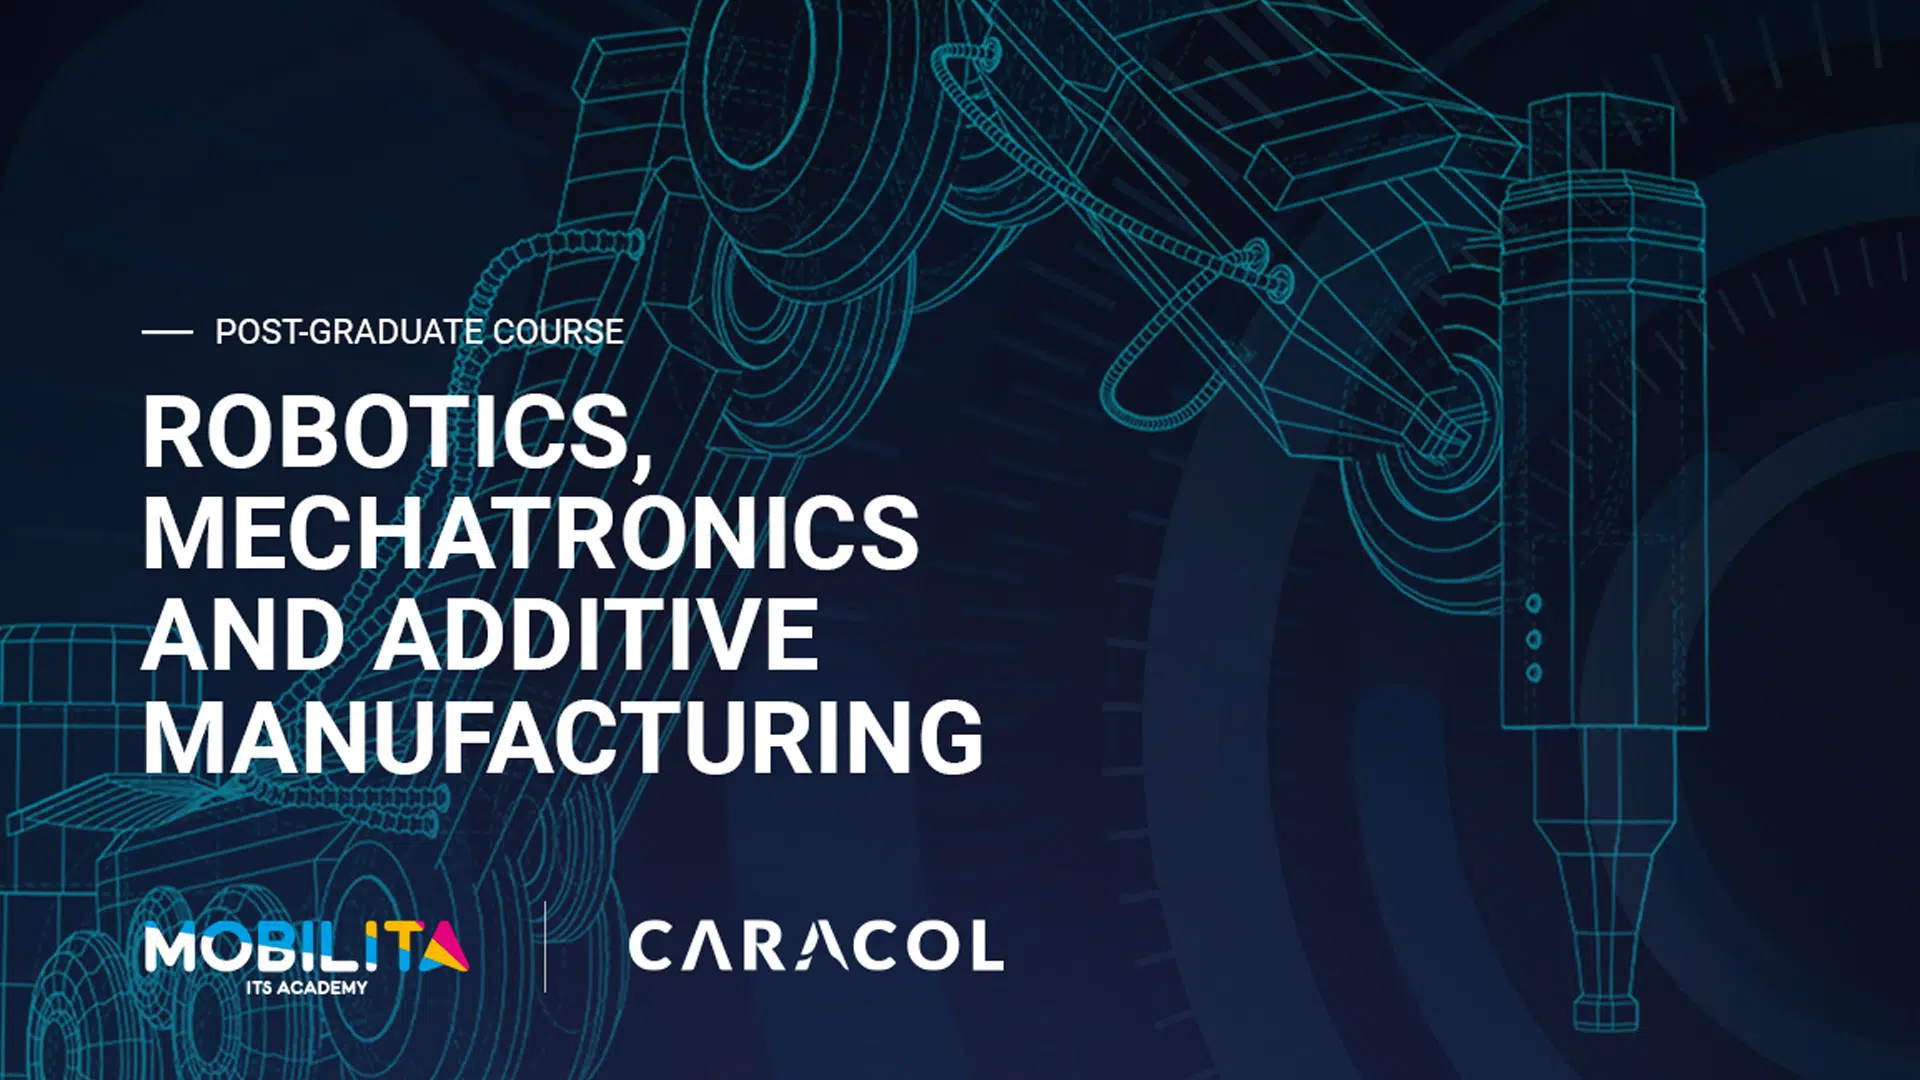 Caracol and Mobilita join forces for the post-graduate on Robotics, Mechatronics and Additive Manufacturing